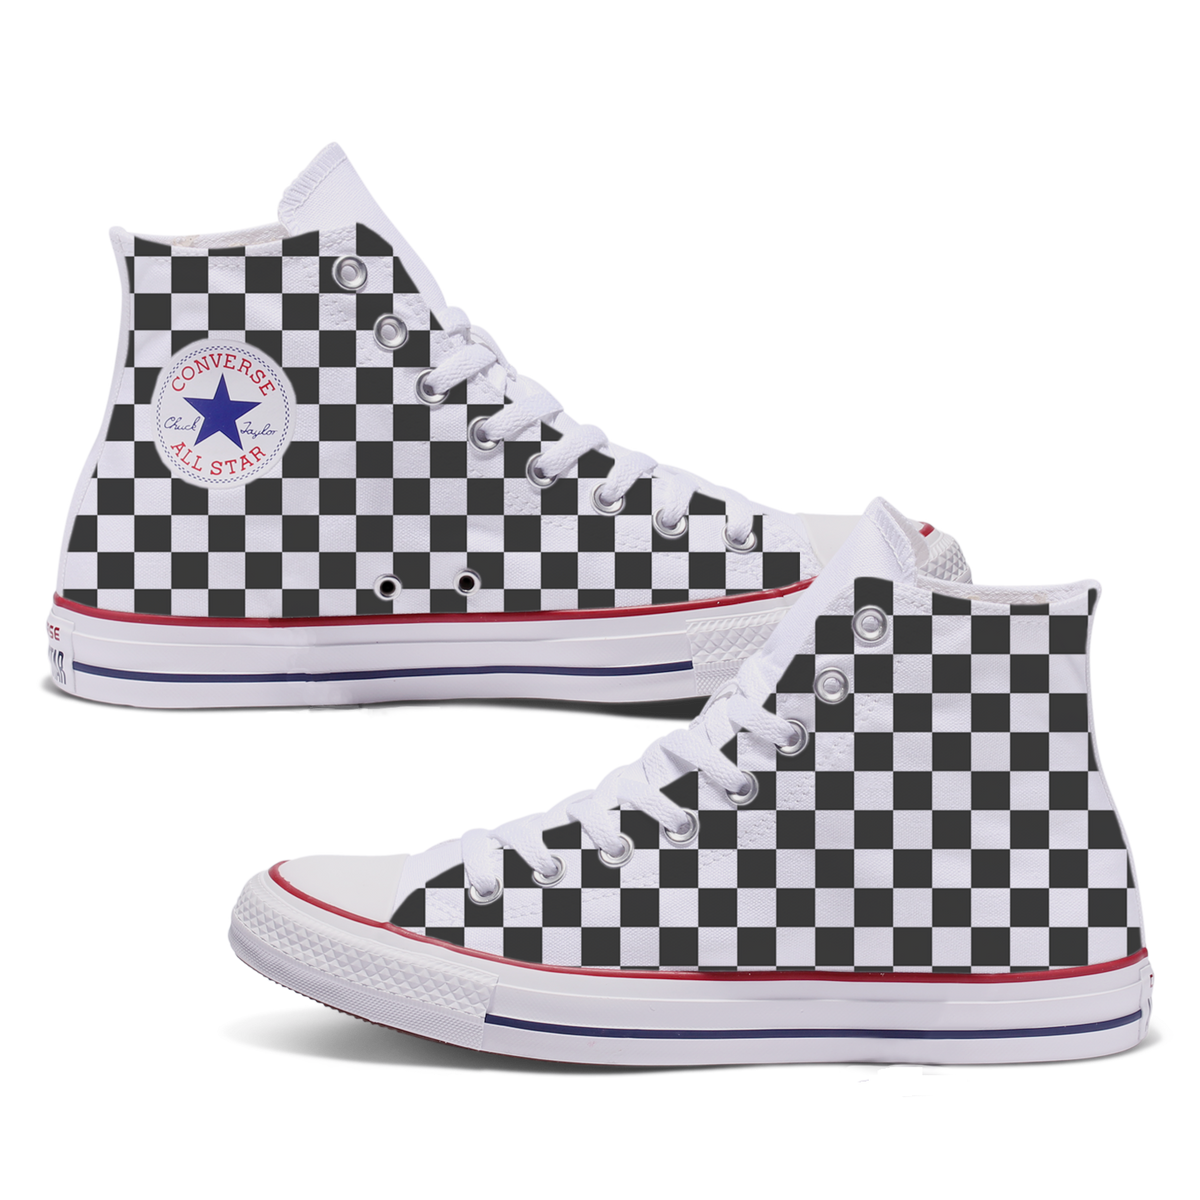 Adult Checkered Converse